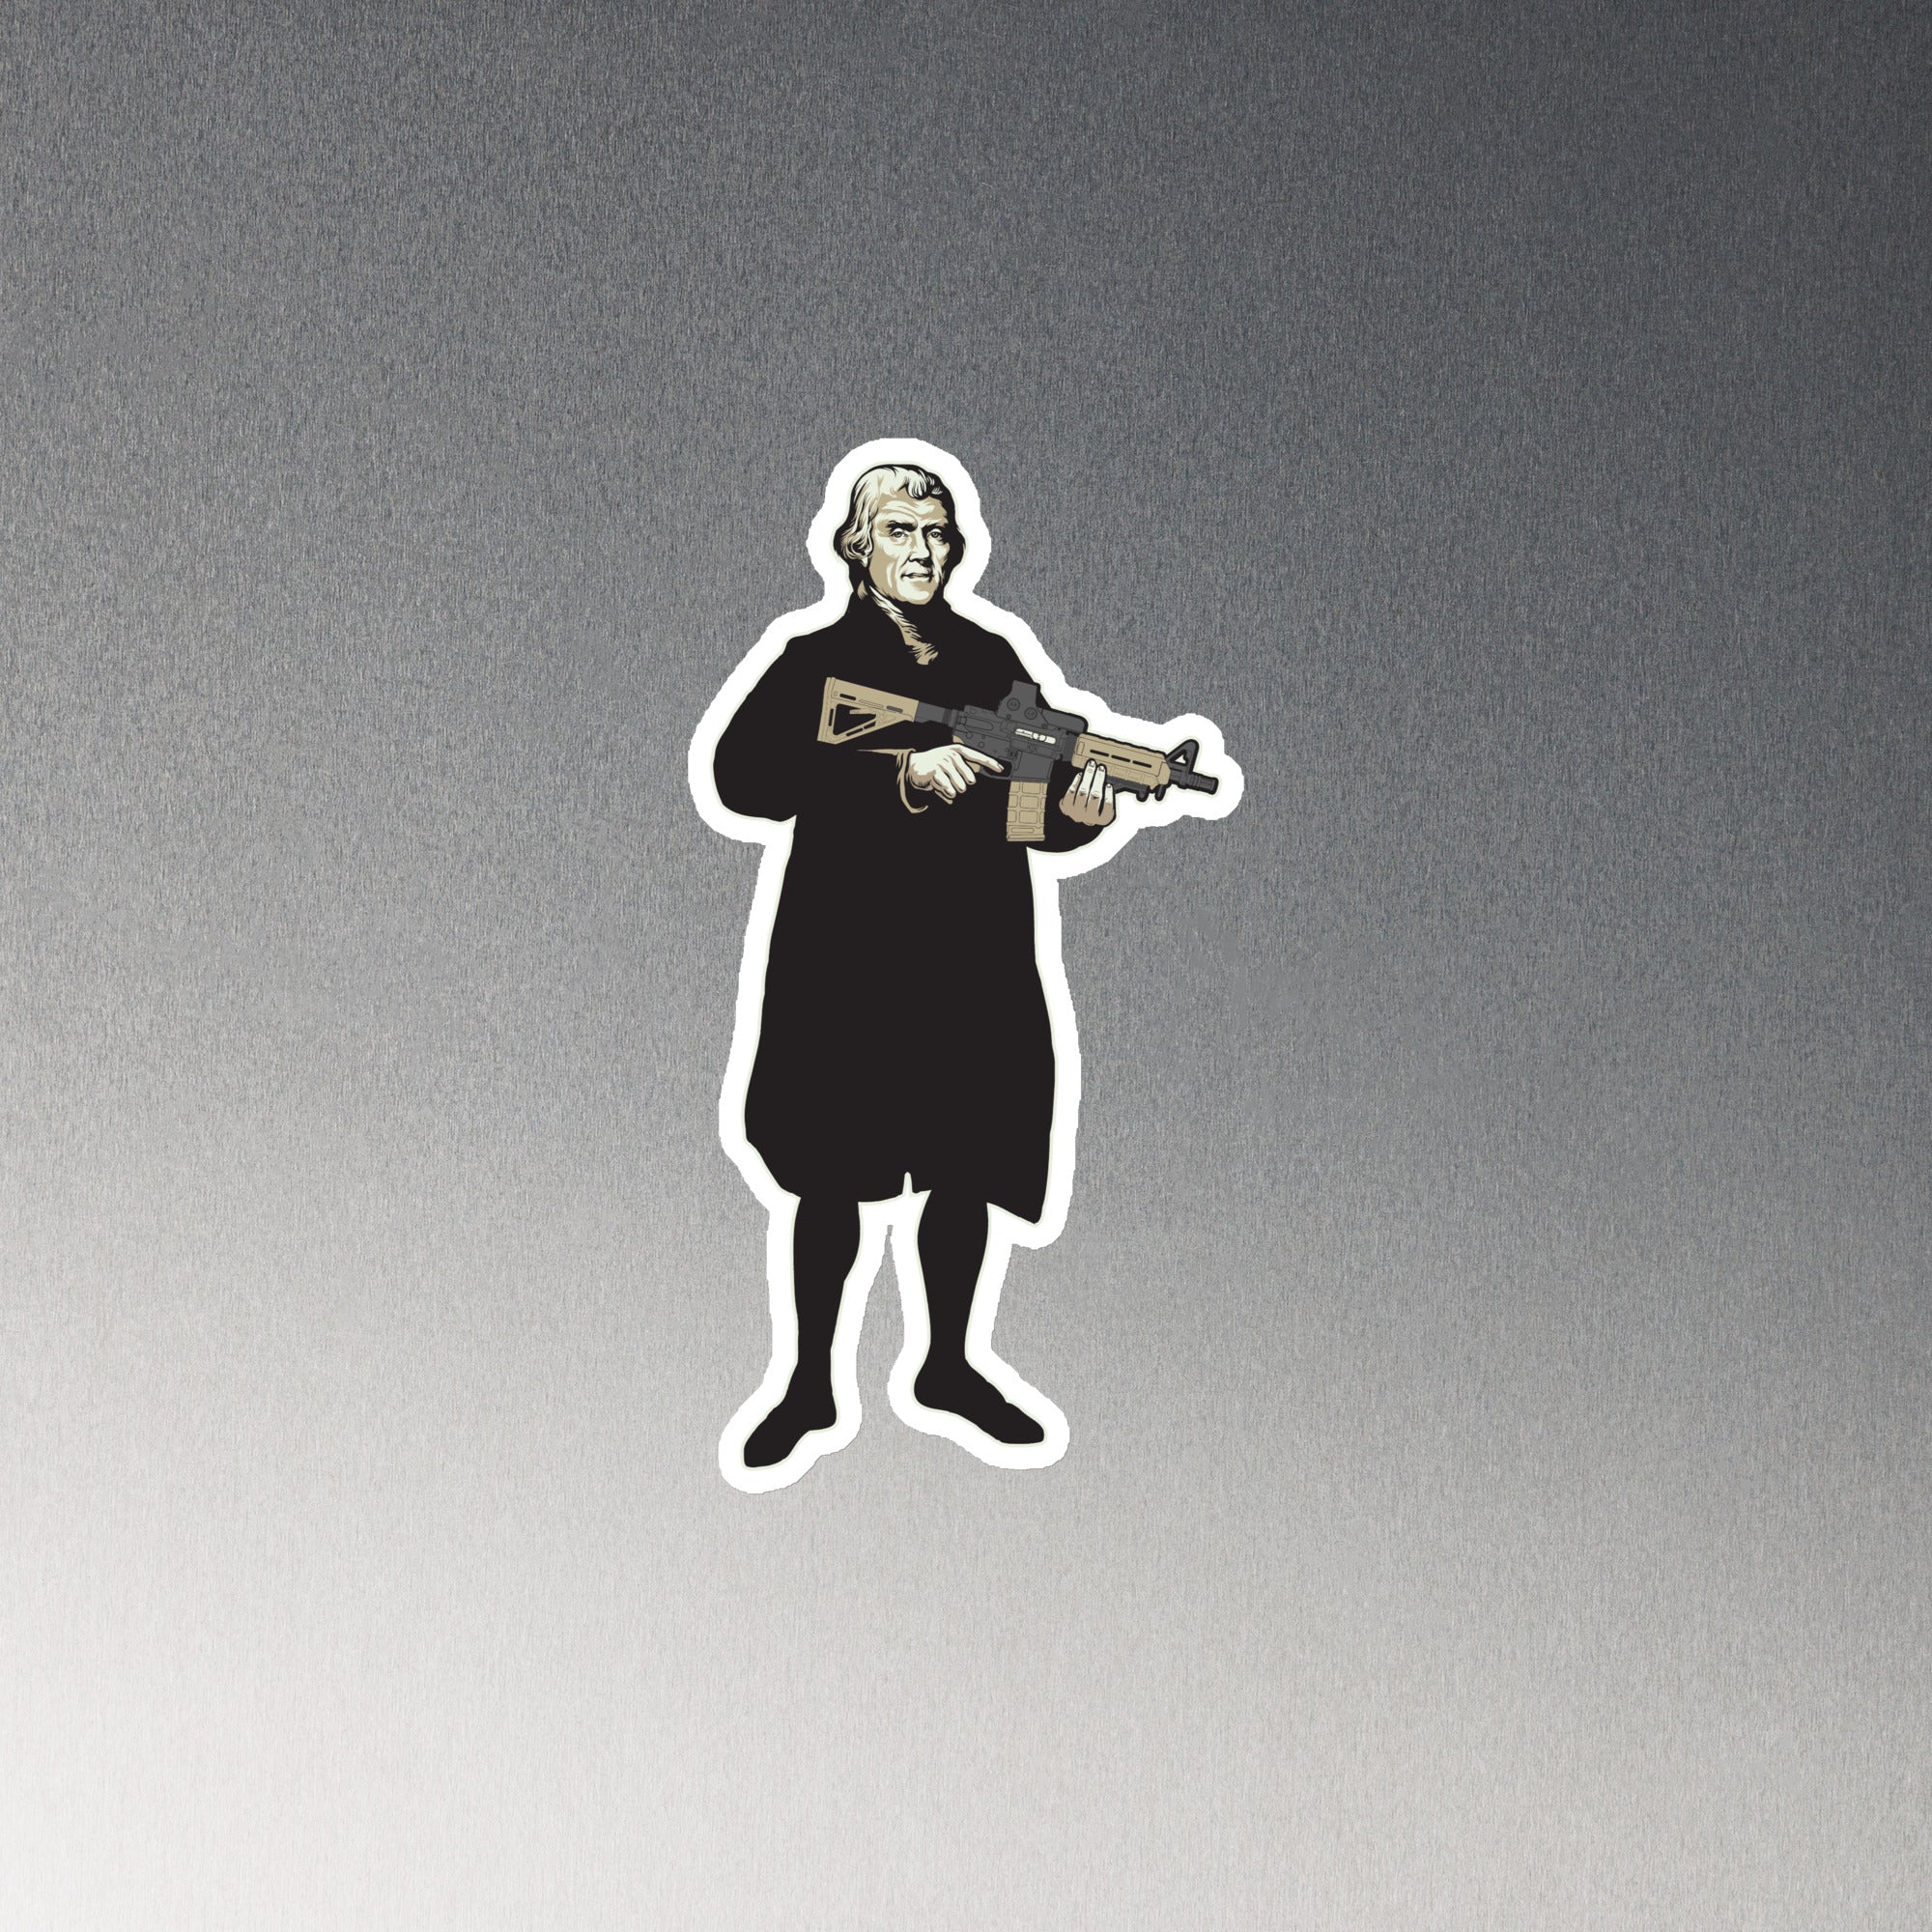 Thomas Jefferson With a Rifle Die-Cut Magnet